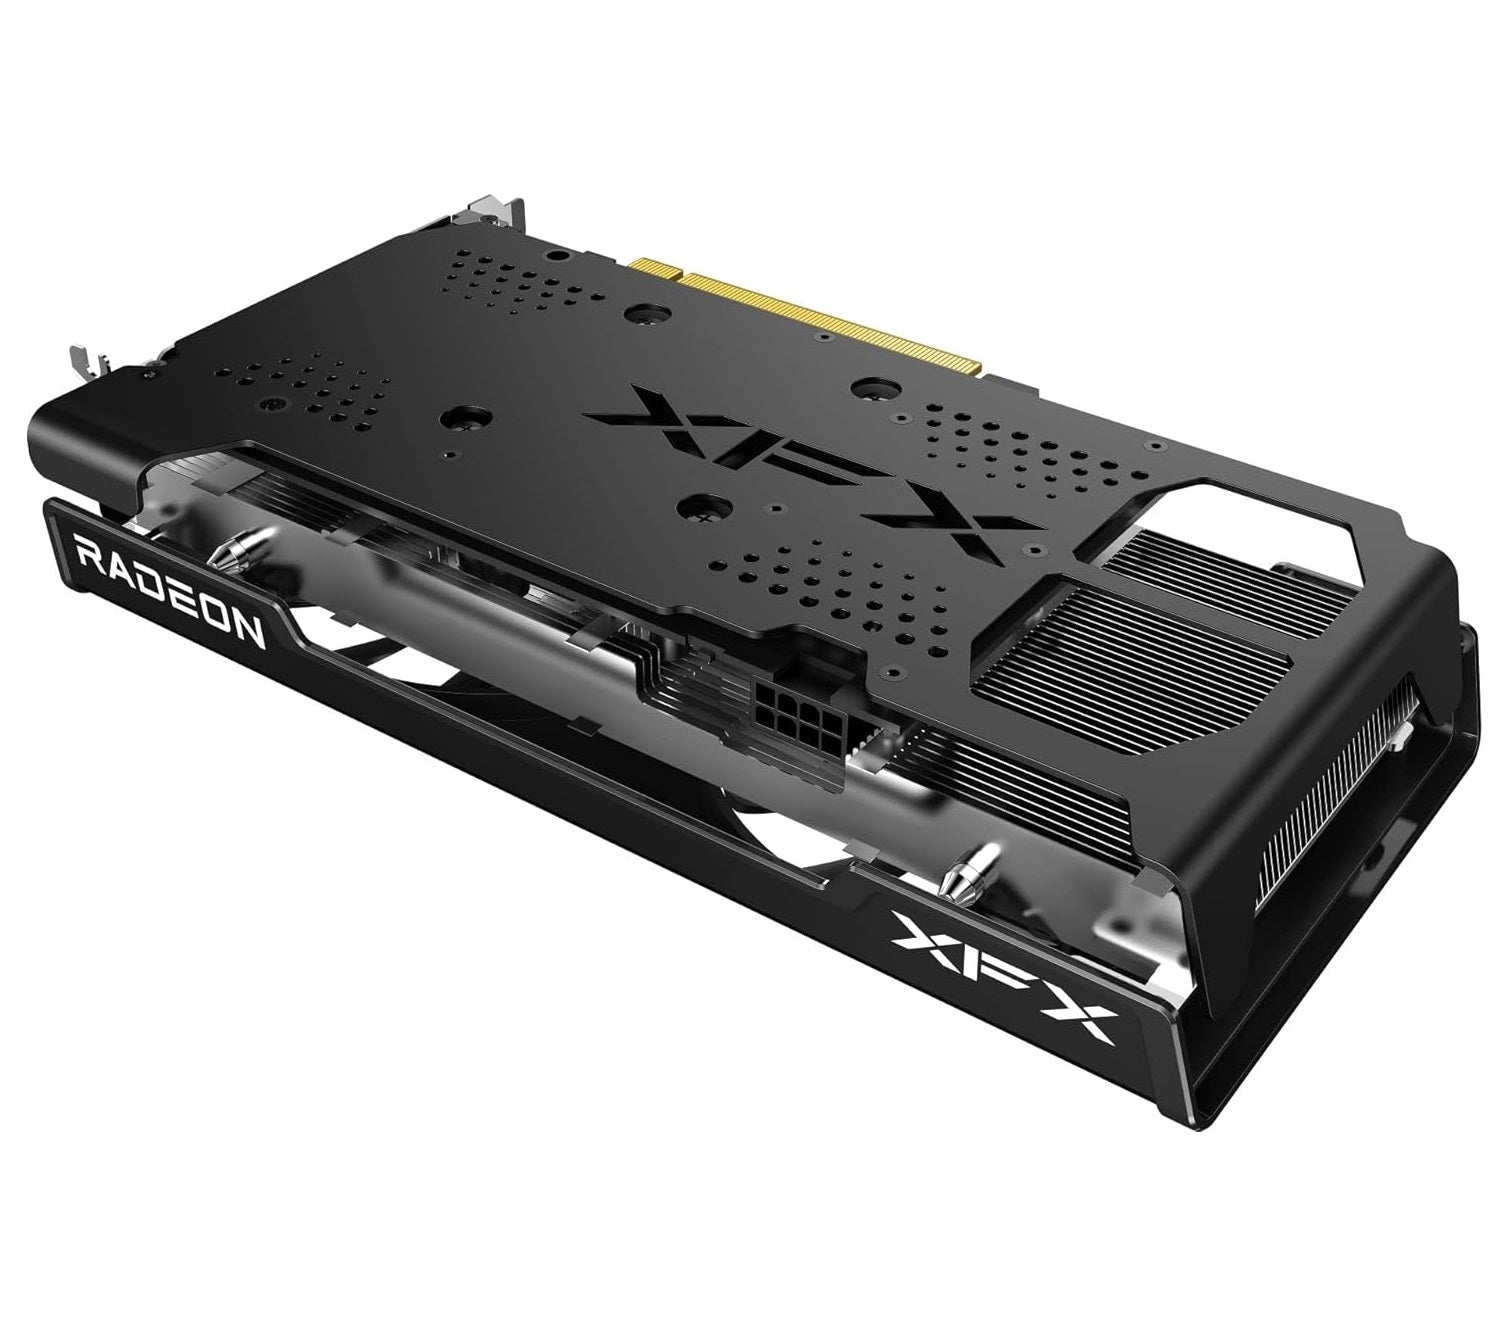 XFX Speedster Swft 210 AMD Radeon Rx 6600 Core Gaming Graphics Card With 8Gb Gddr6, AMD Rdnaâ„¢ 2